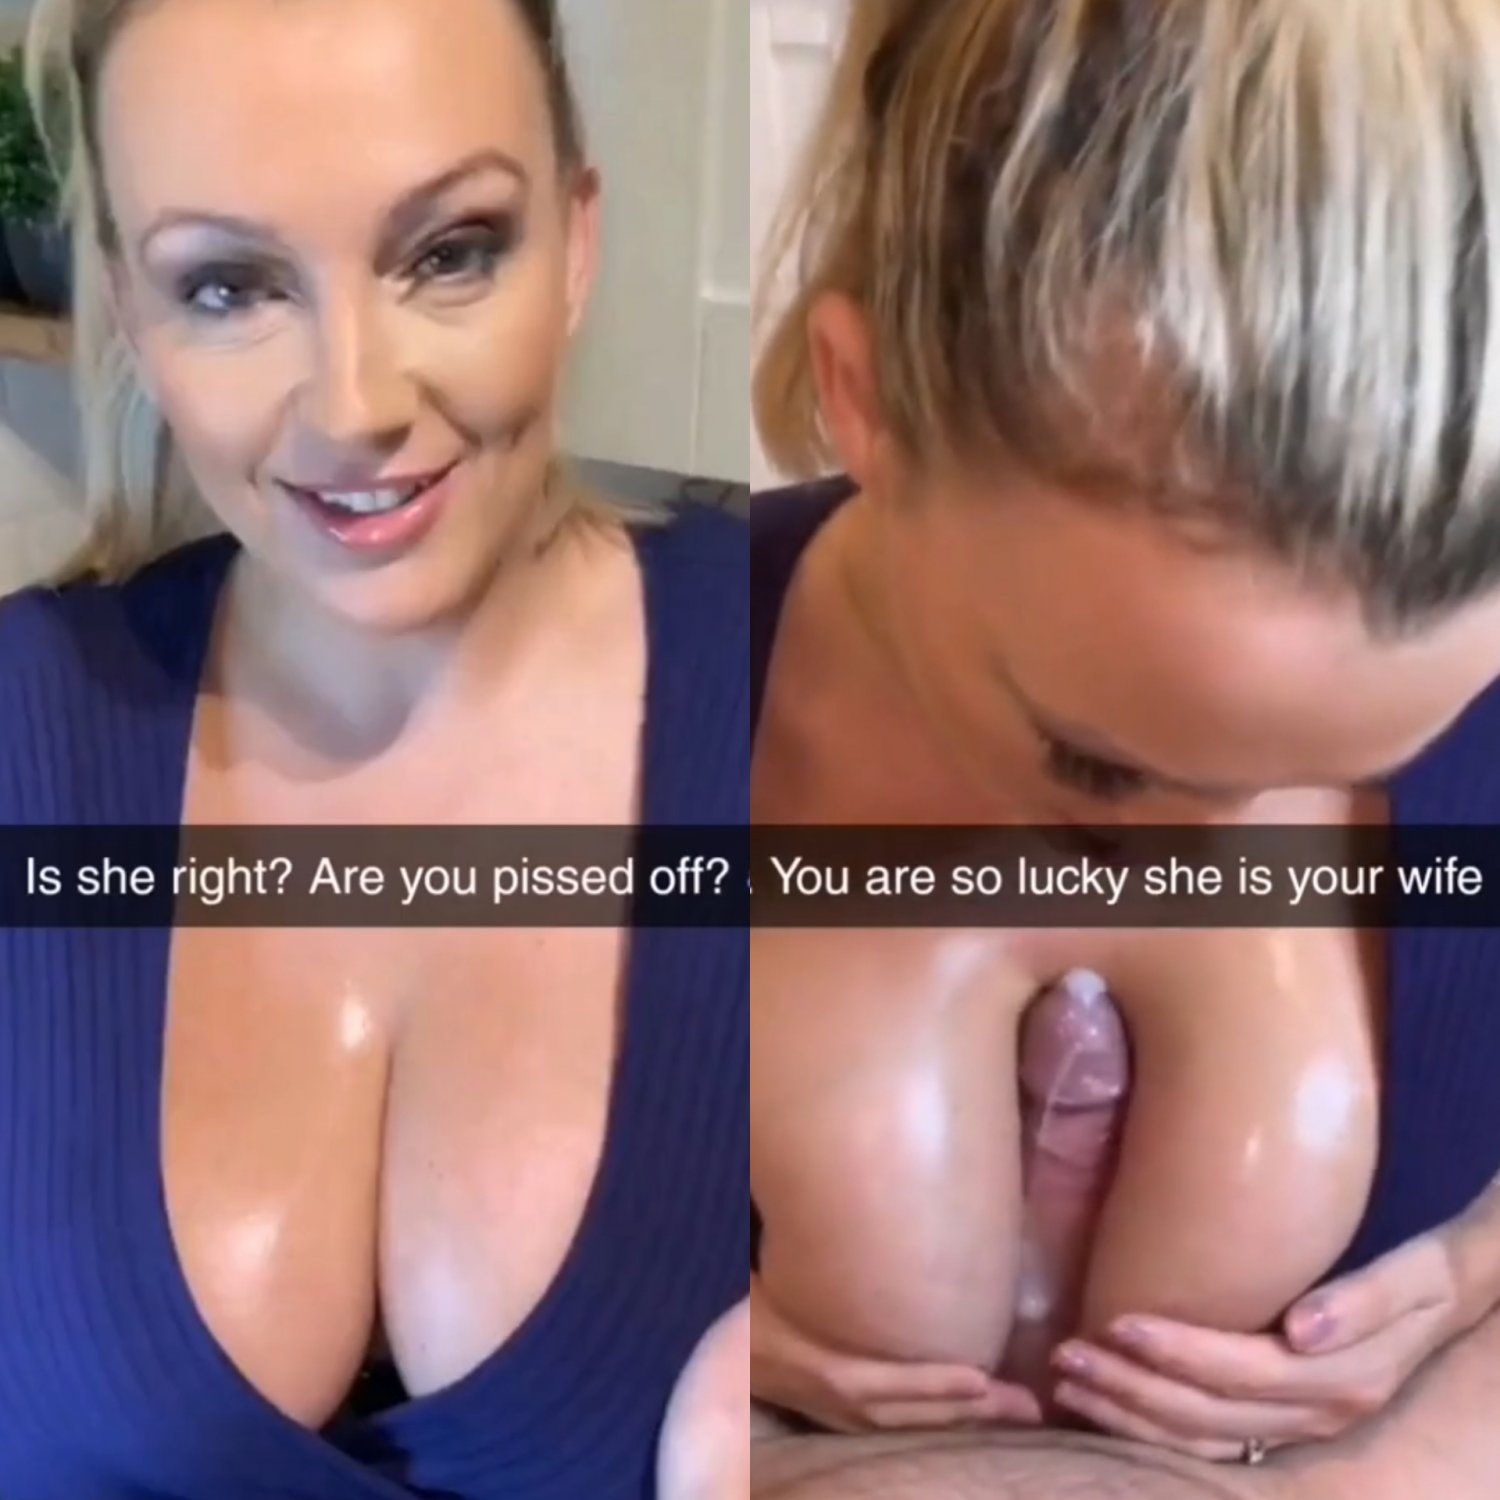 Cheating wife? 🤔 - Porn Videos and Photos